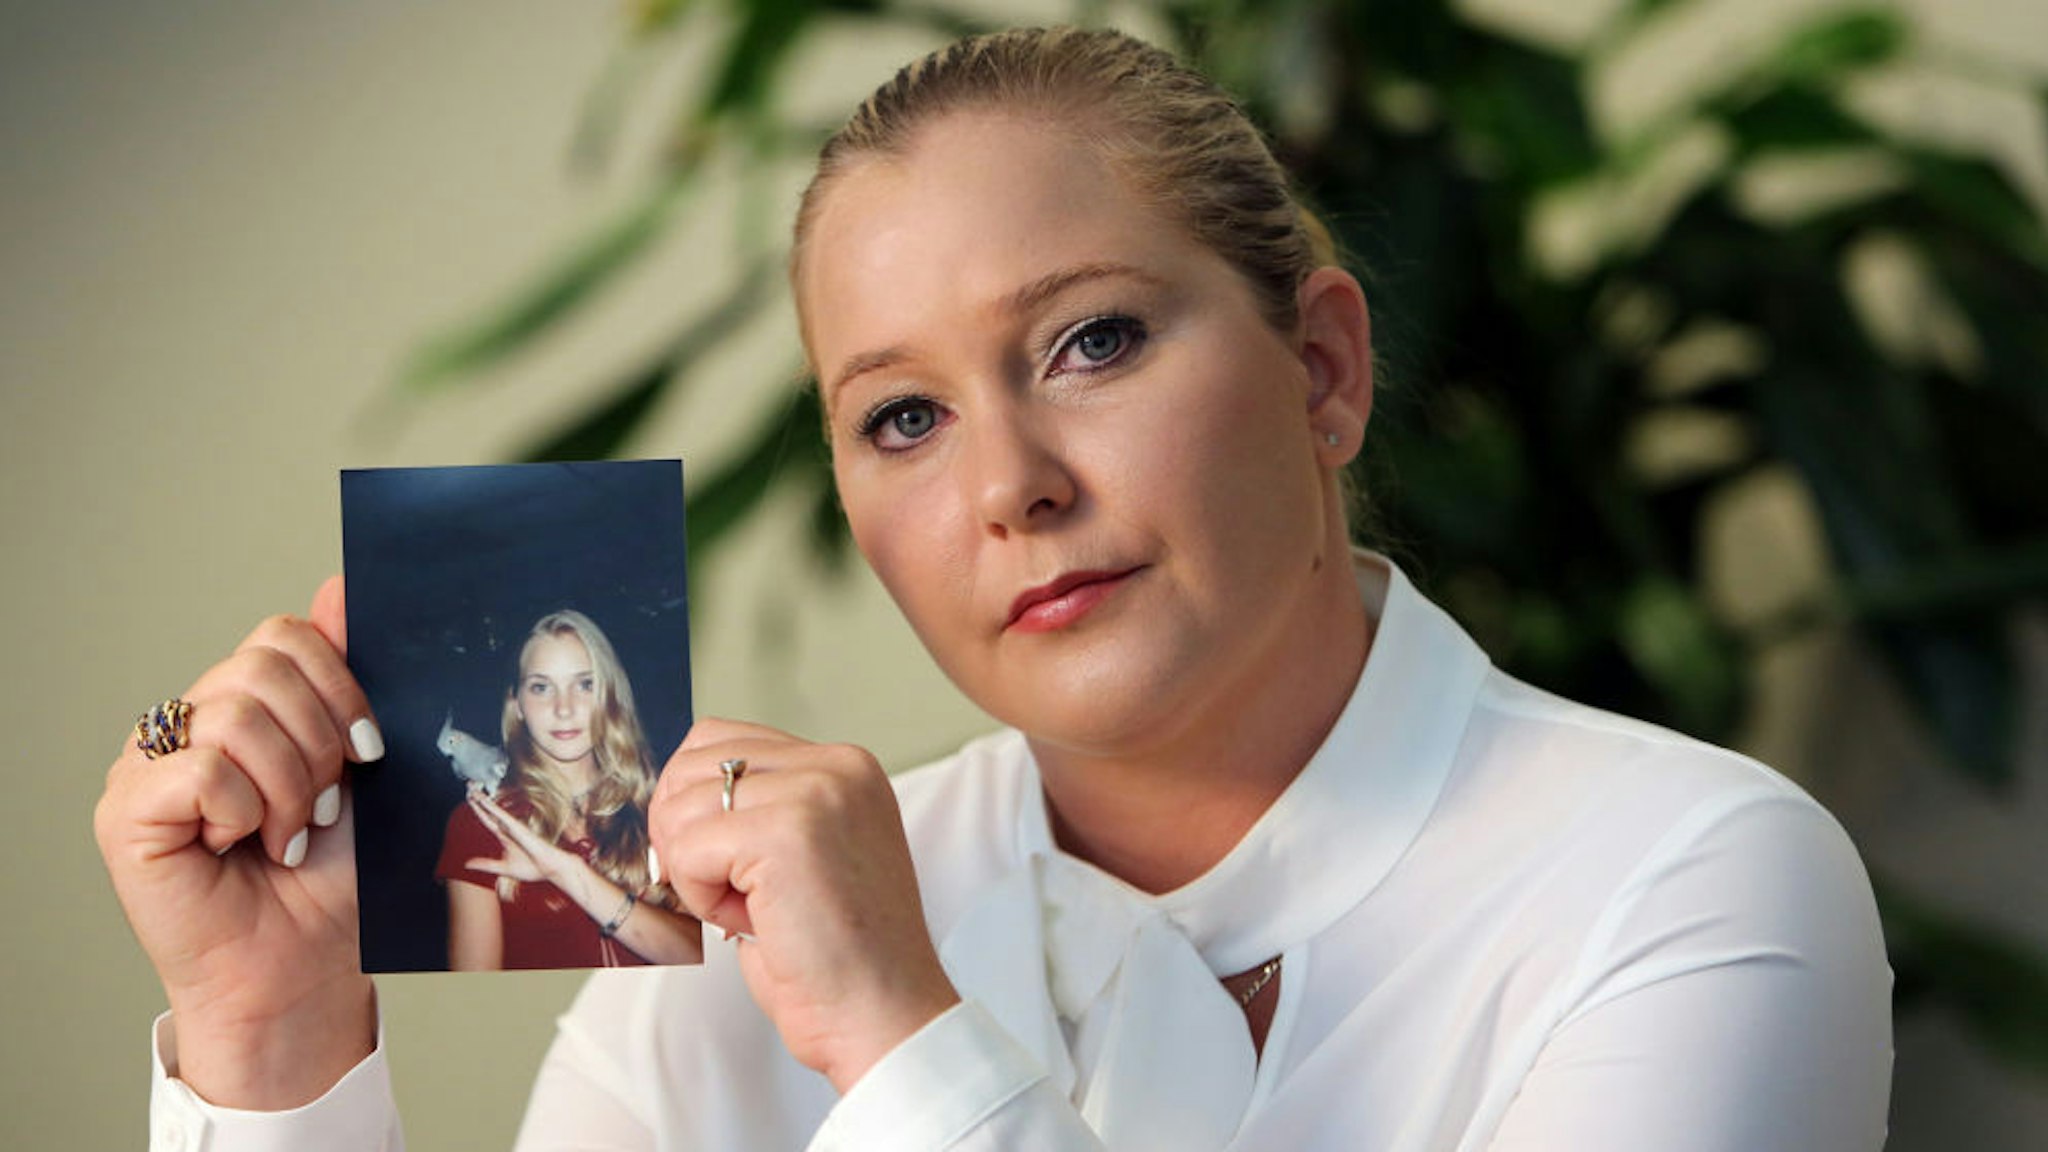 Virginia Roberts holds a photo of herself at age 16, when she says Palm Beach multimillionaire Jeffrey Epstein began abusing her sexually. (Emily Michot/Miami Herald/TNS)